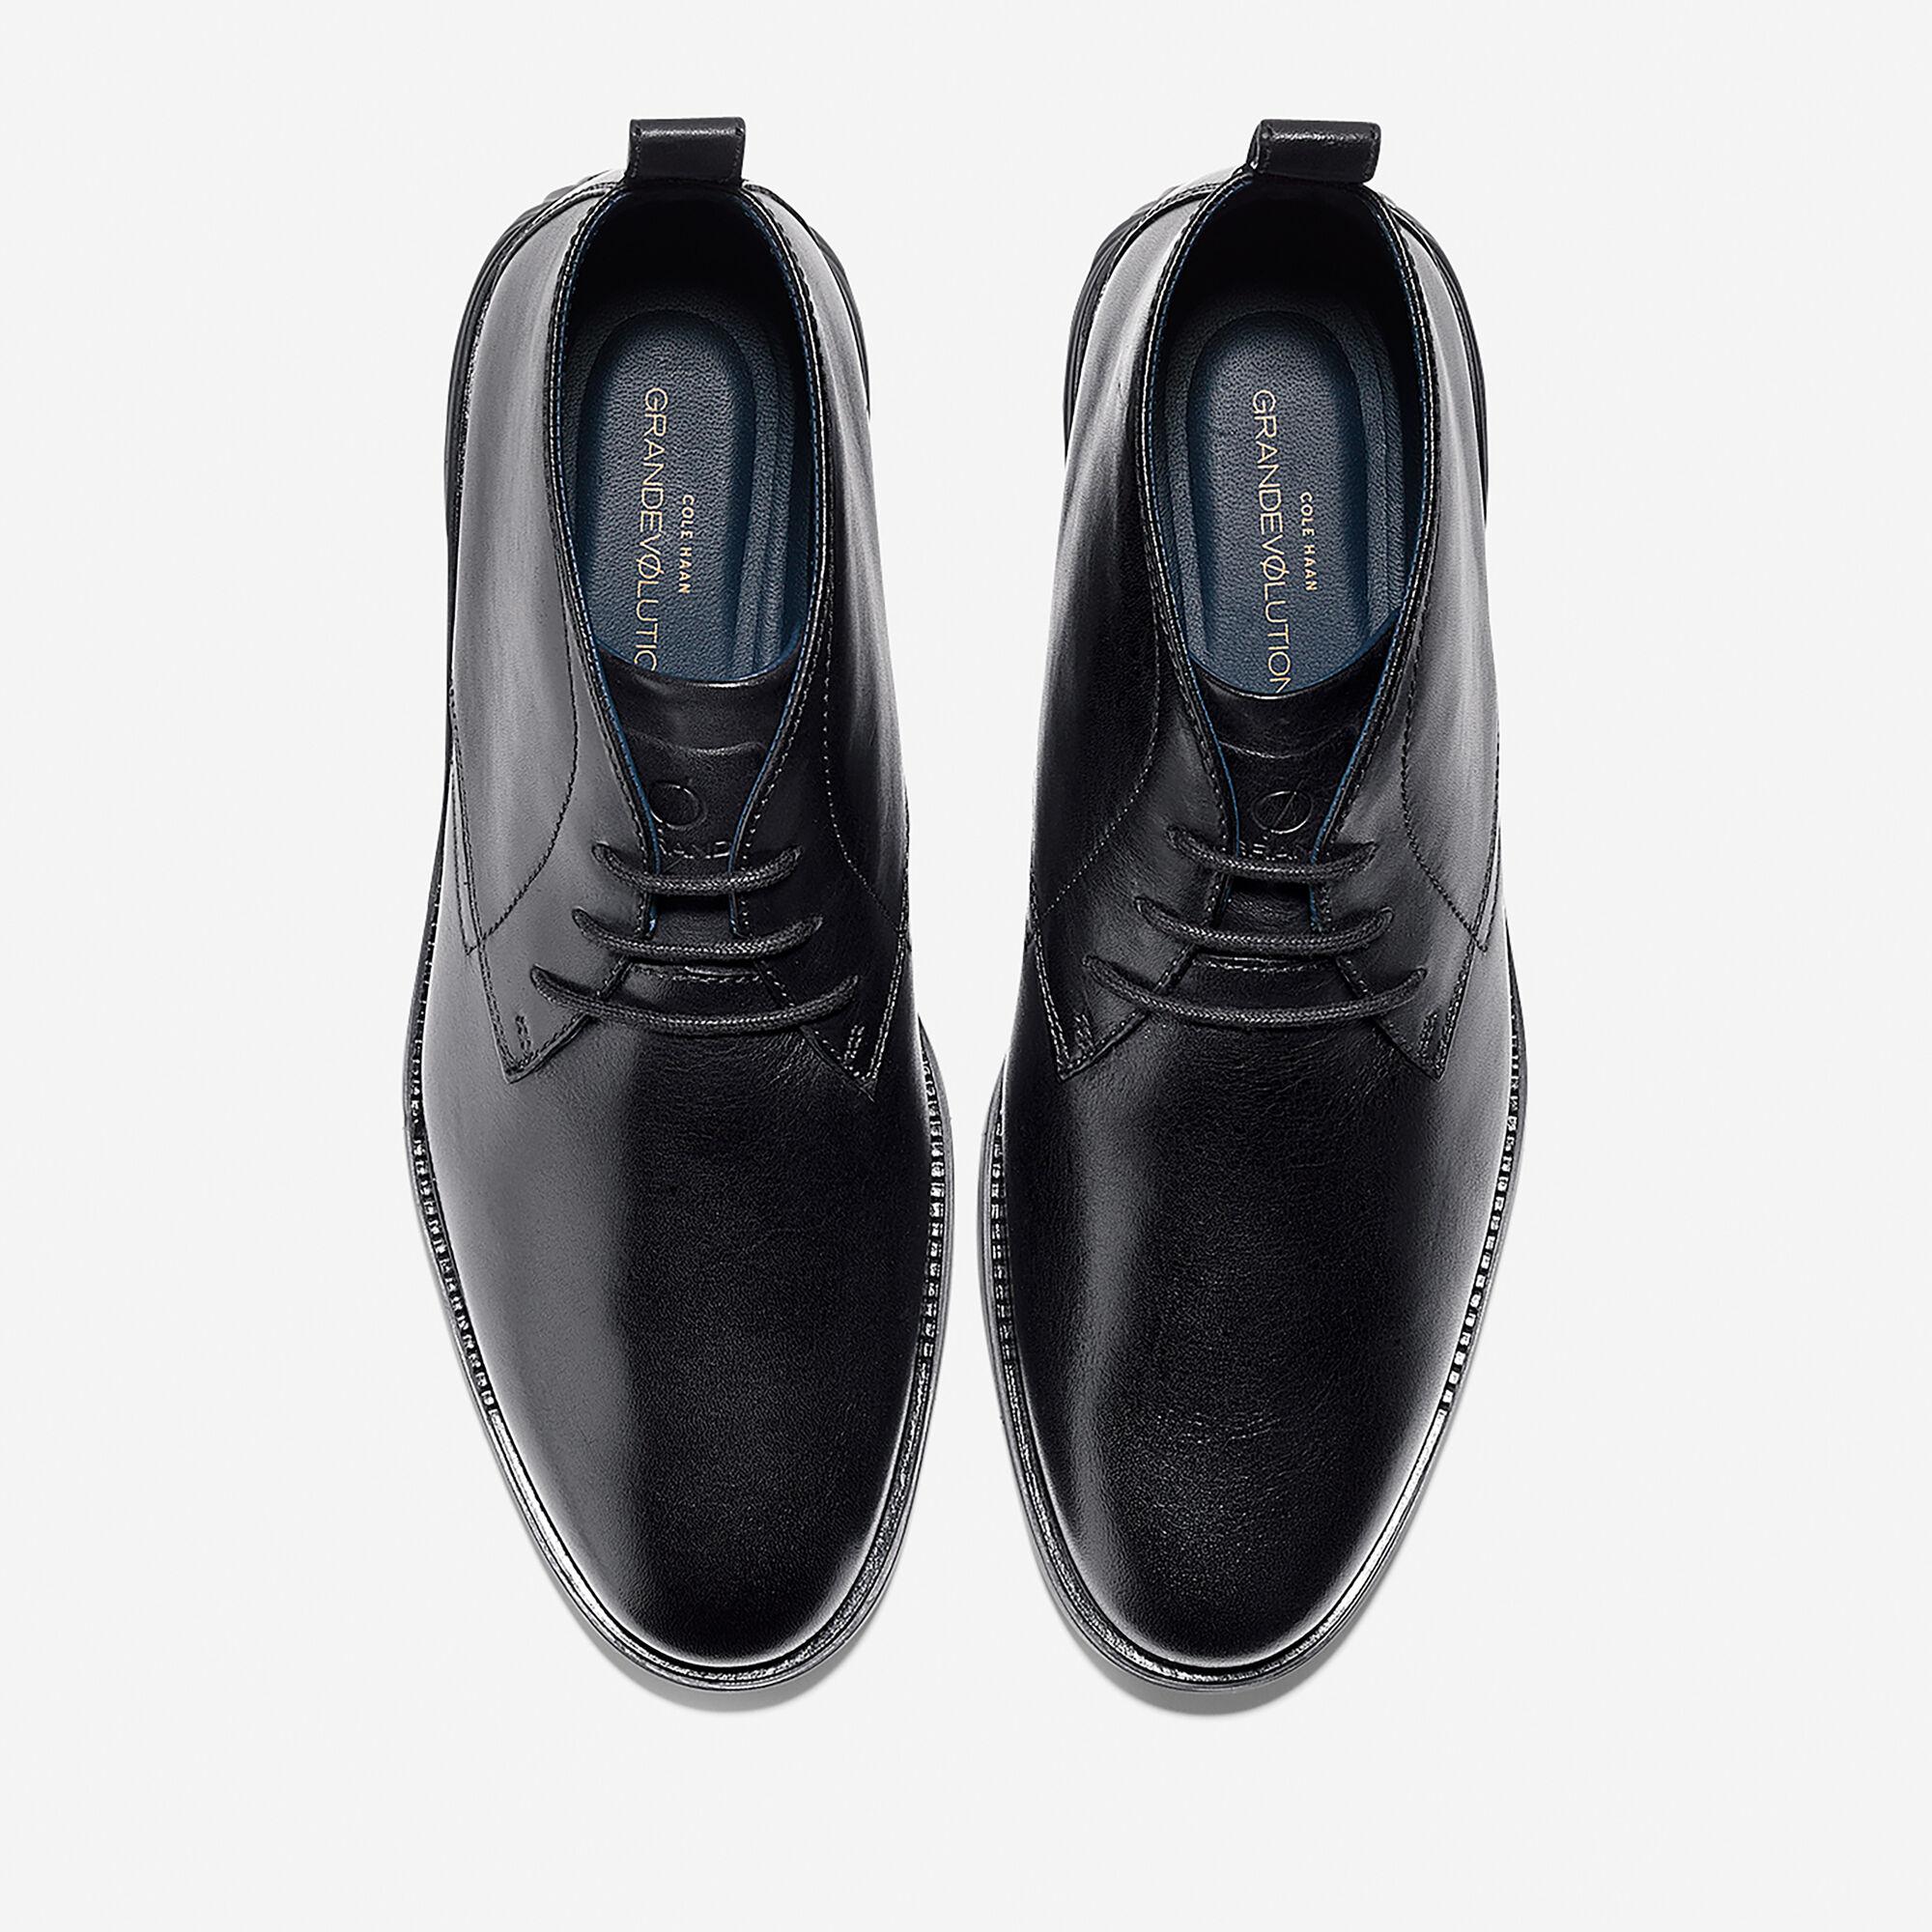 Cole Haan Leather Grand Evolution Chukka in Black for Men - Lyst